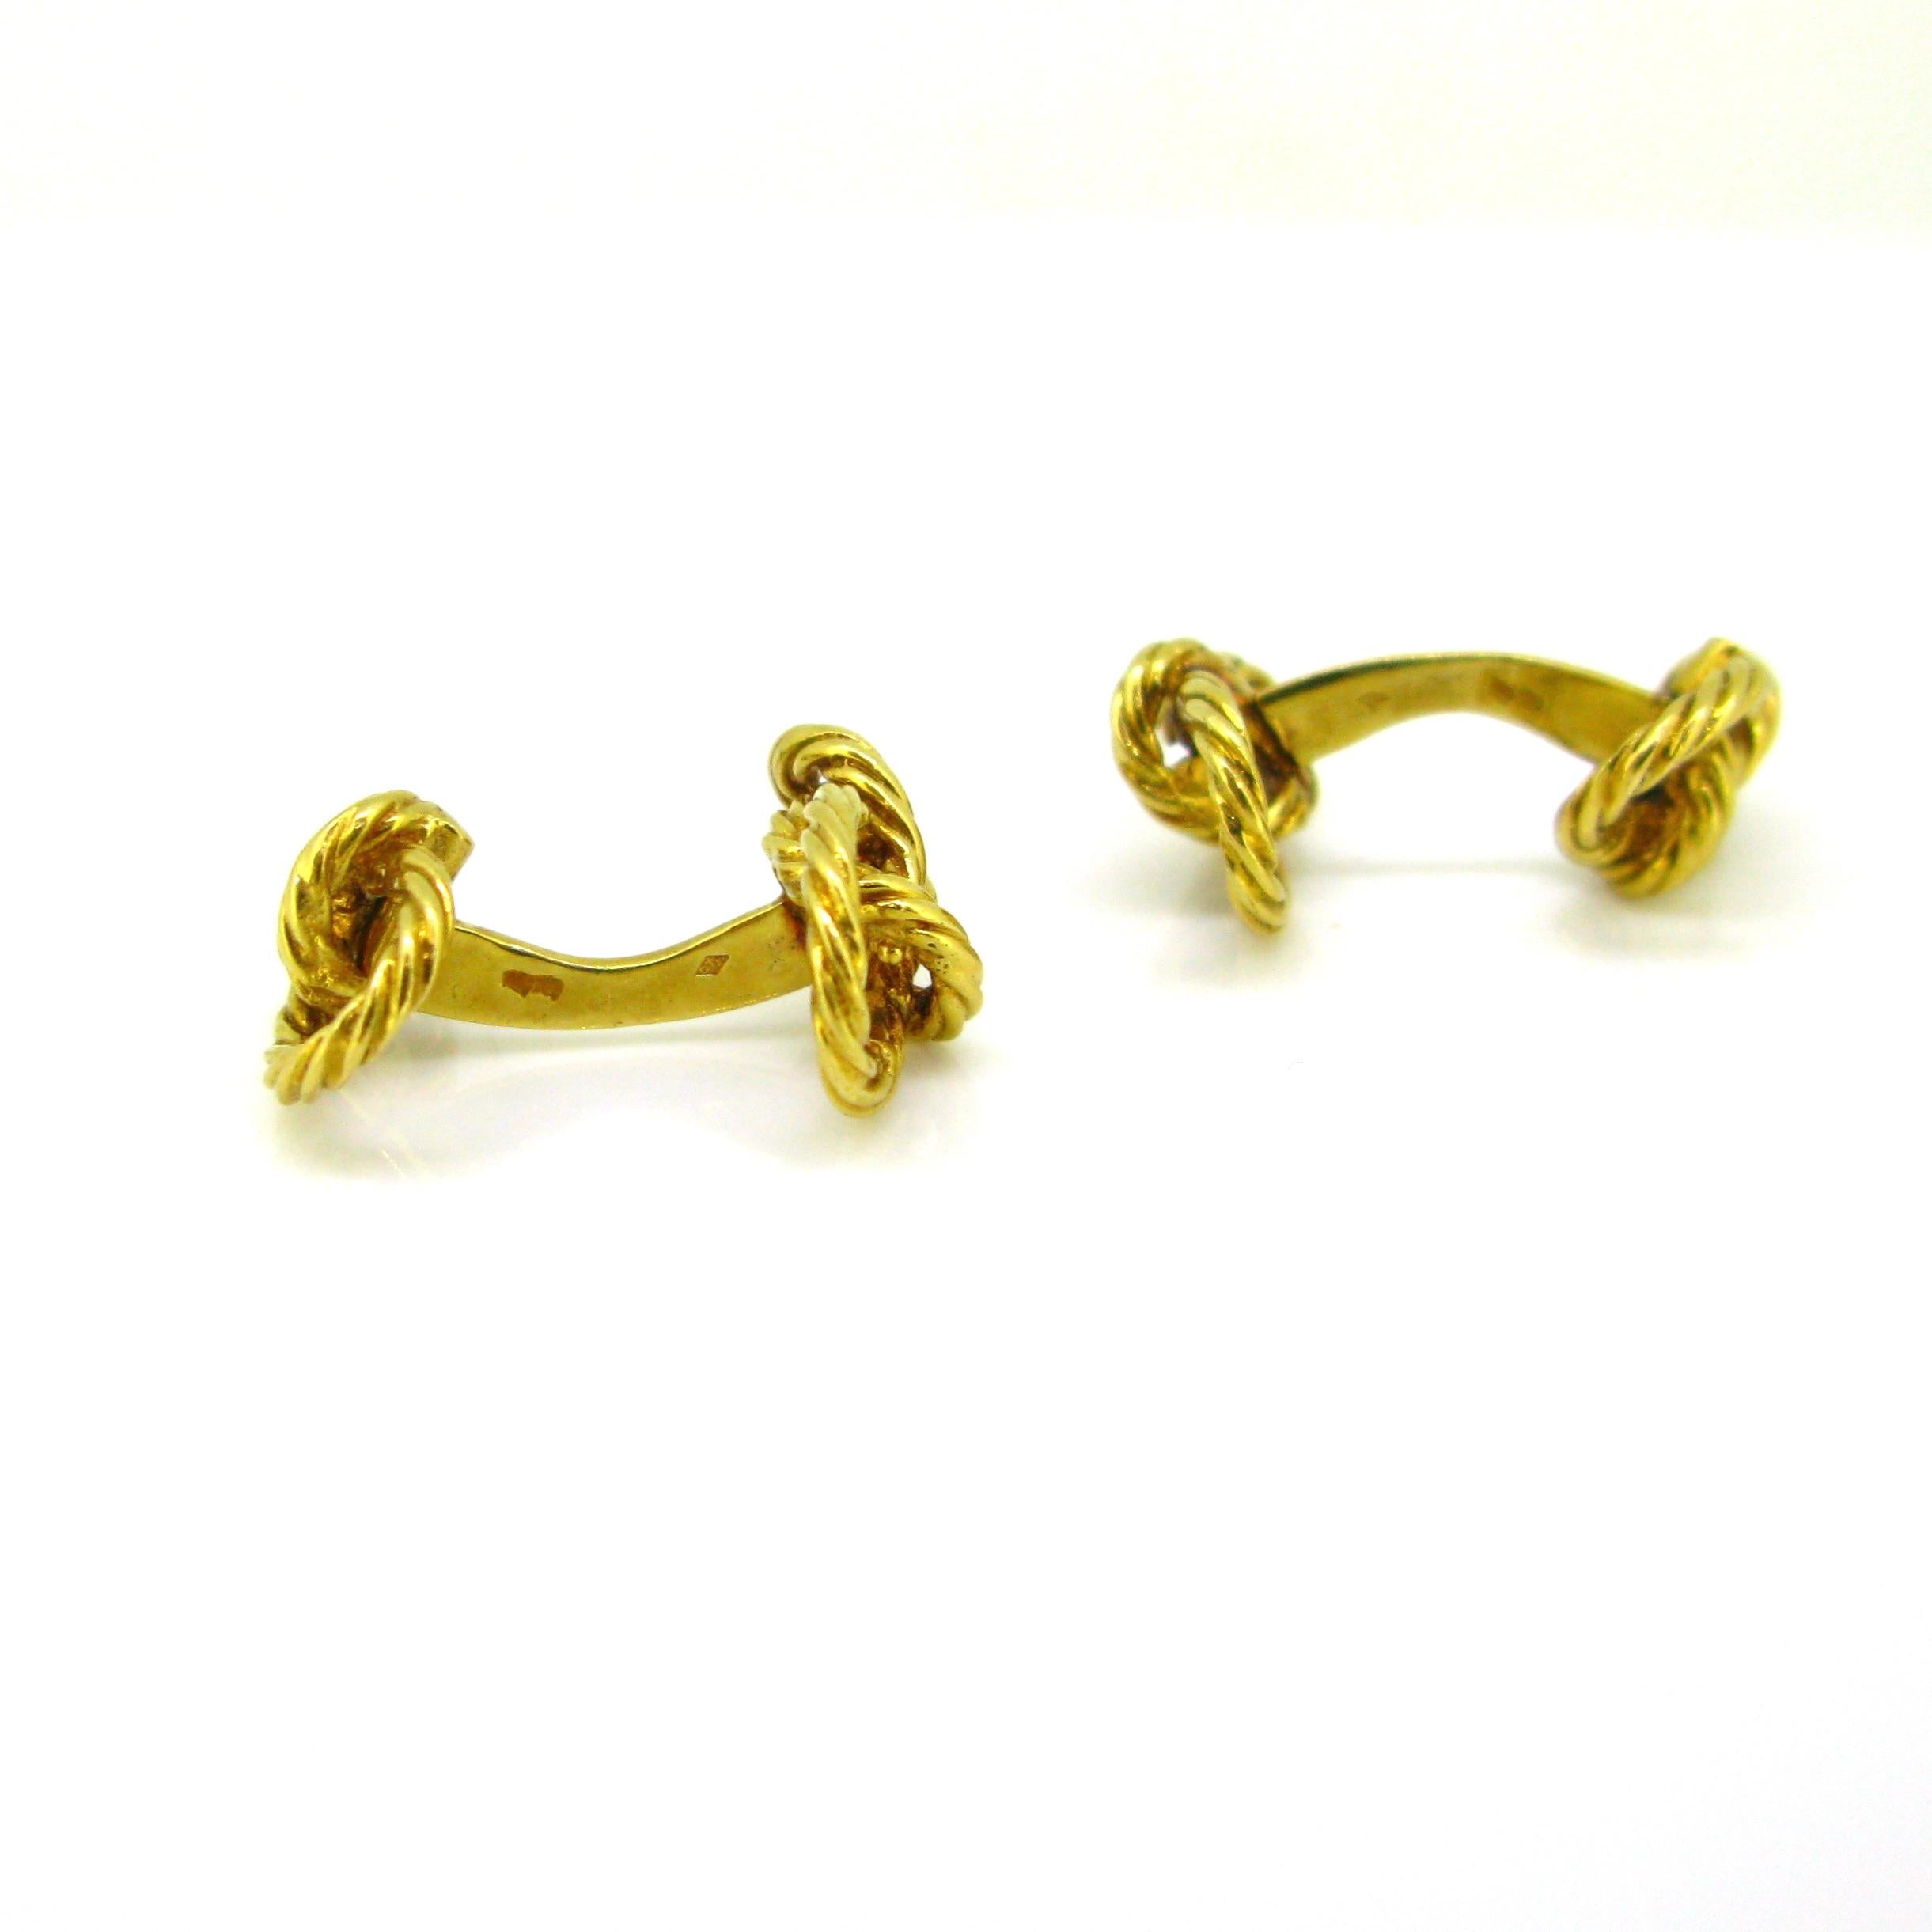 Vintage French 18kt Gold Knot Cufflinks by De Percin, circa 1960 1